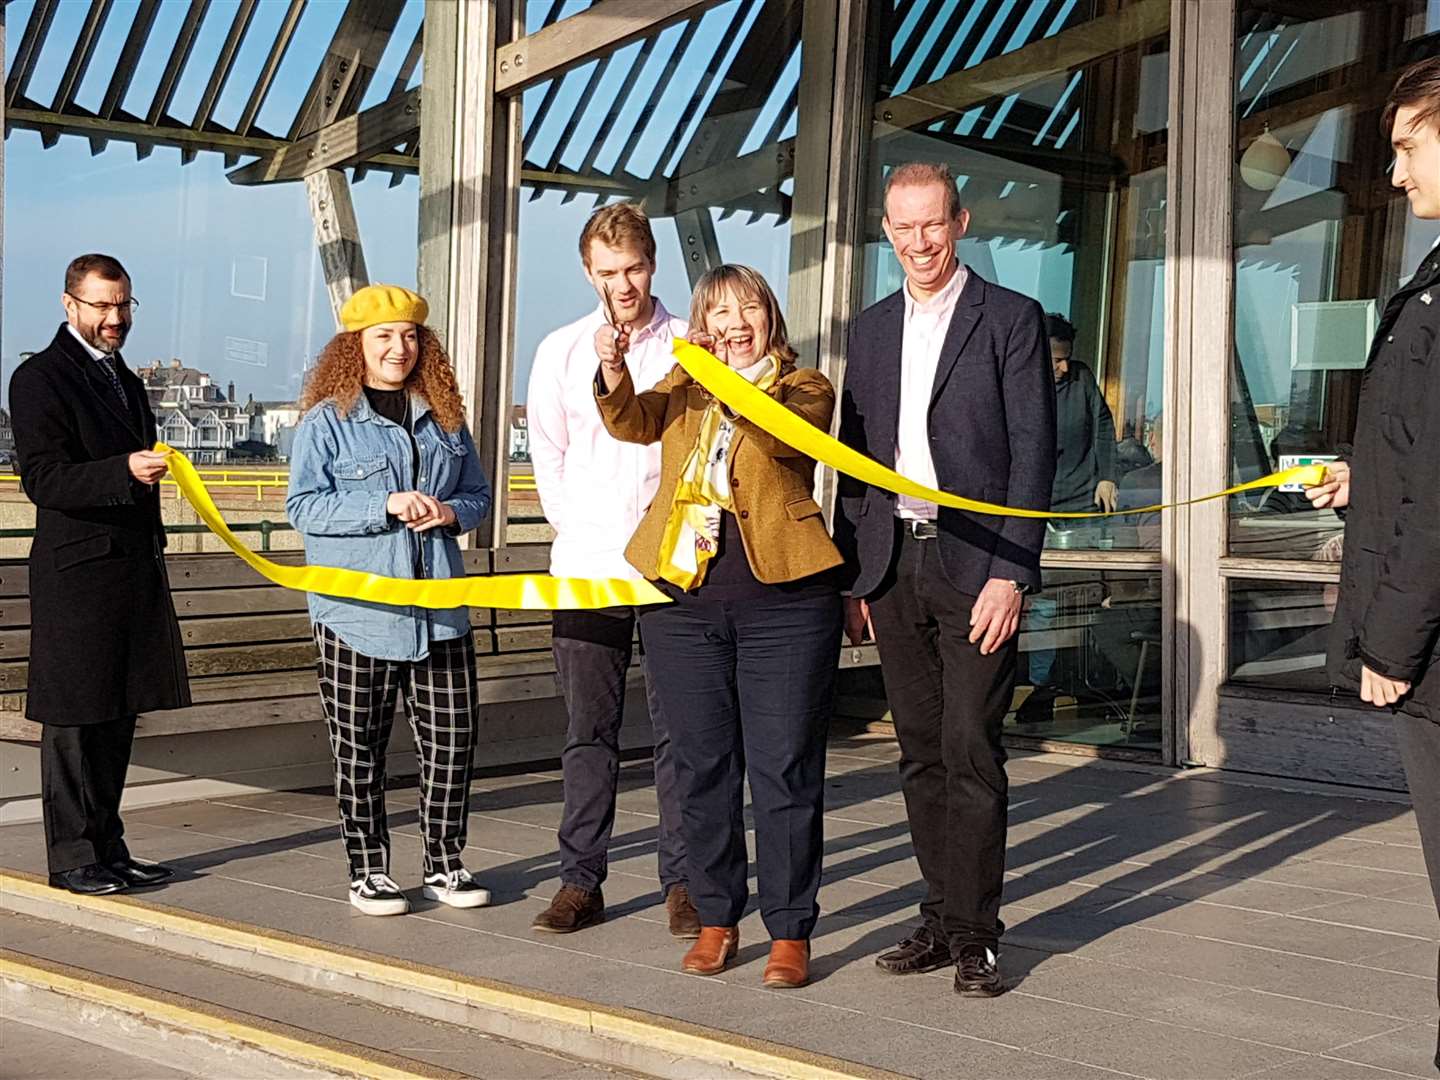 Council chairman Cllr Sue Chandler cutting the ribbon alongside Cllr Trevor Bartlet, right, Tim Biggs, centre left, and Rebecca Hodson